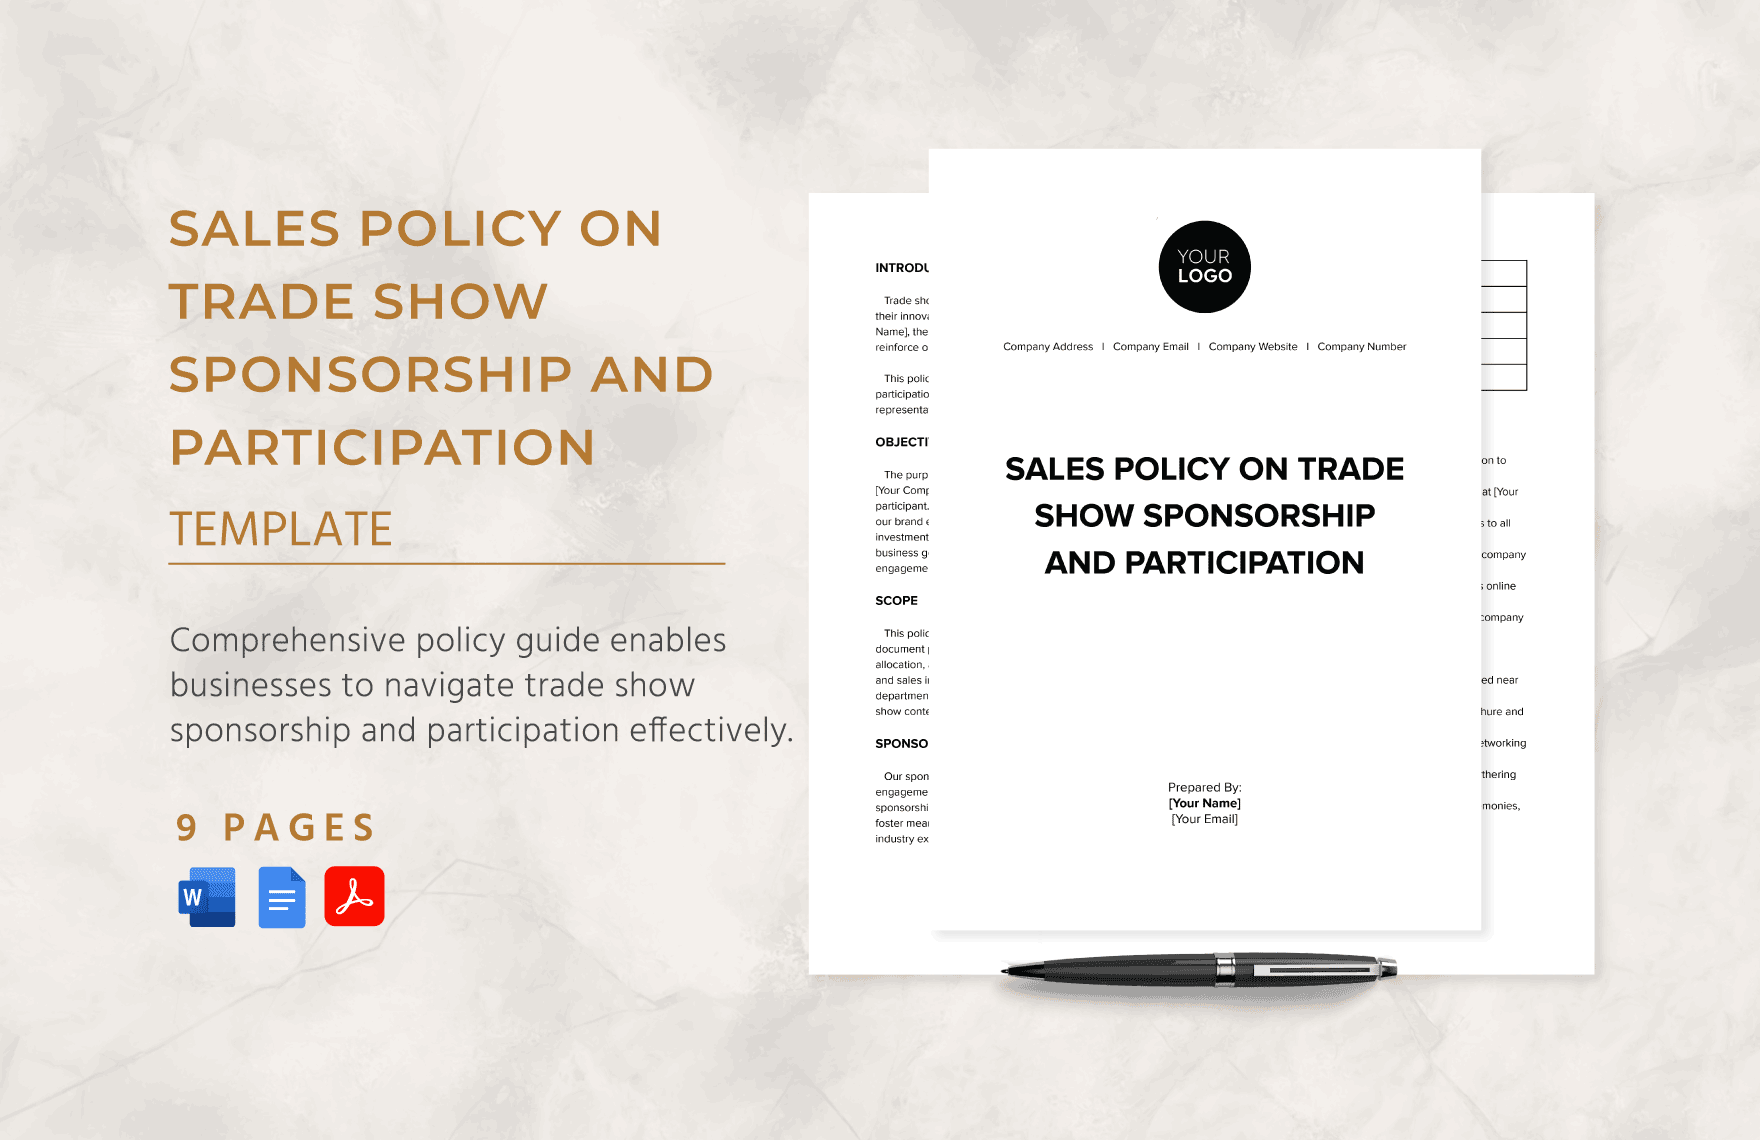 Sales Policy on Trade Show Sponsorship and Participation Template